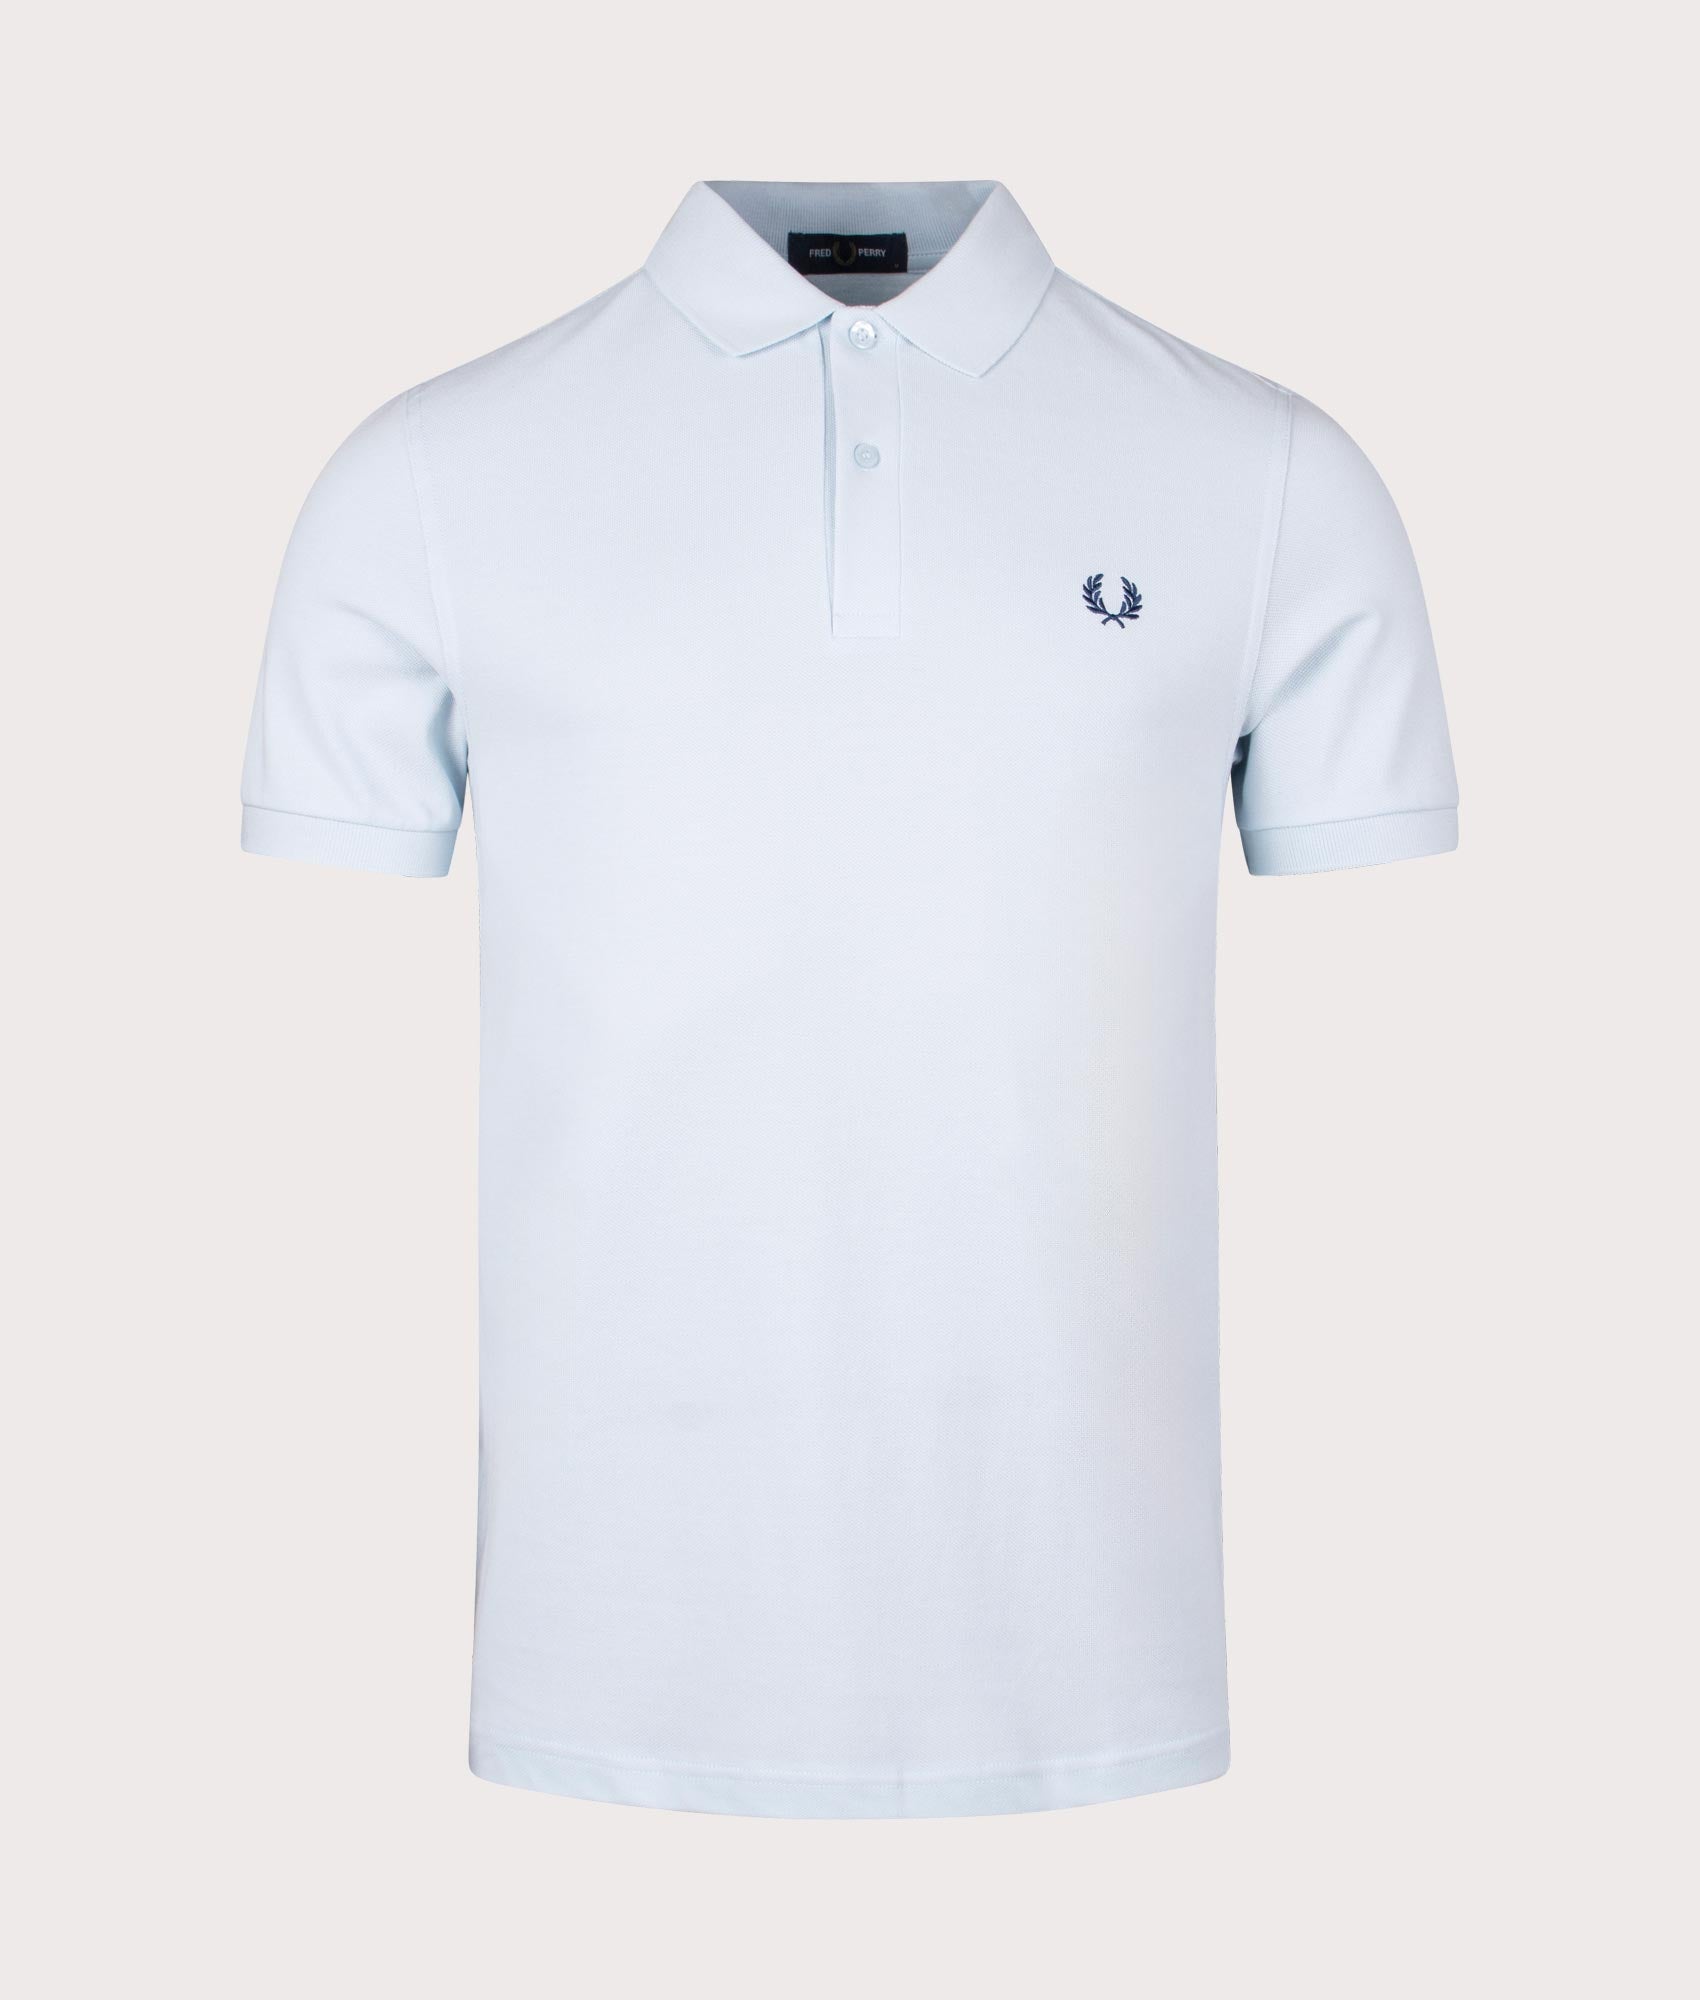 Fred Perry Mens M6000 Polo Shirt - Colour: V08 Light Ice/Midnight Blue - Size: XL